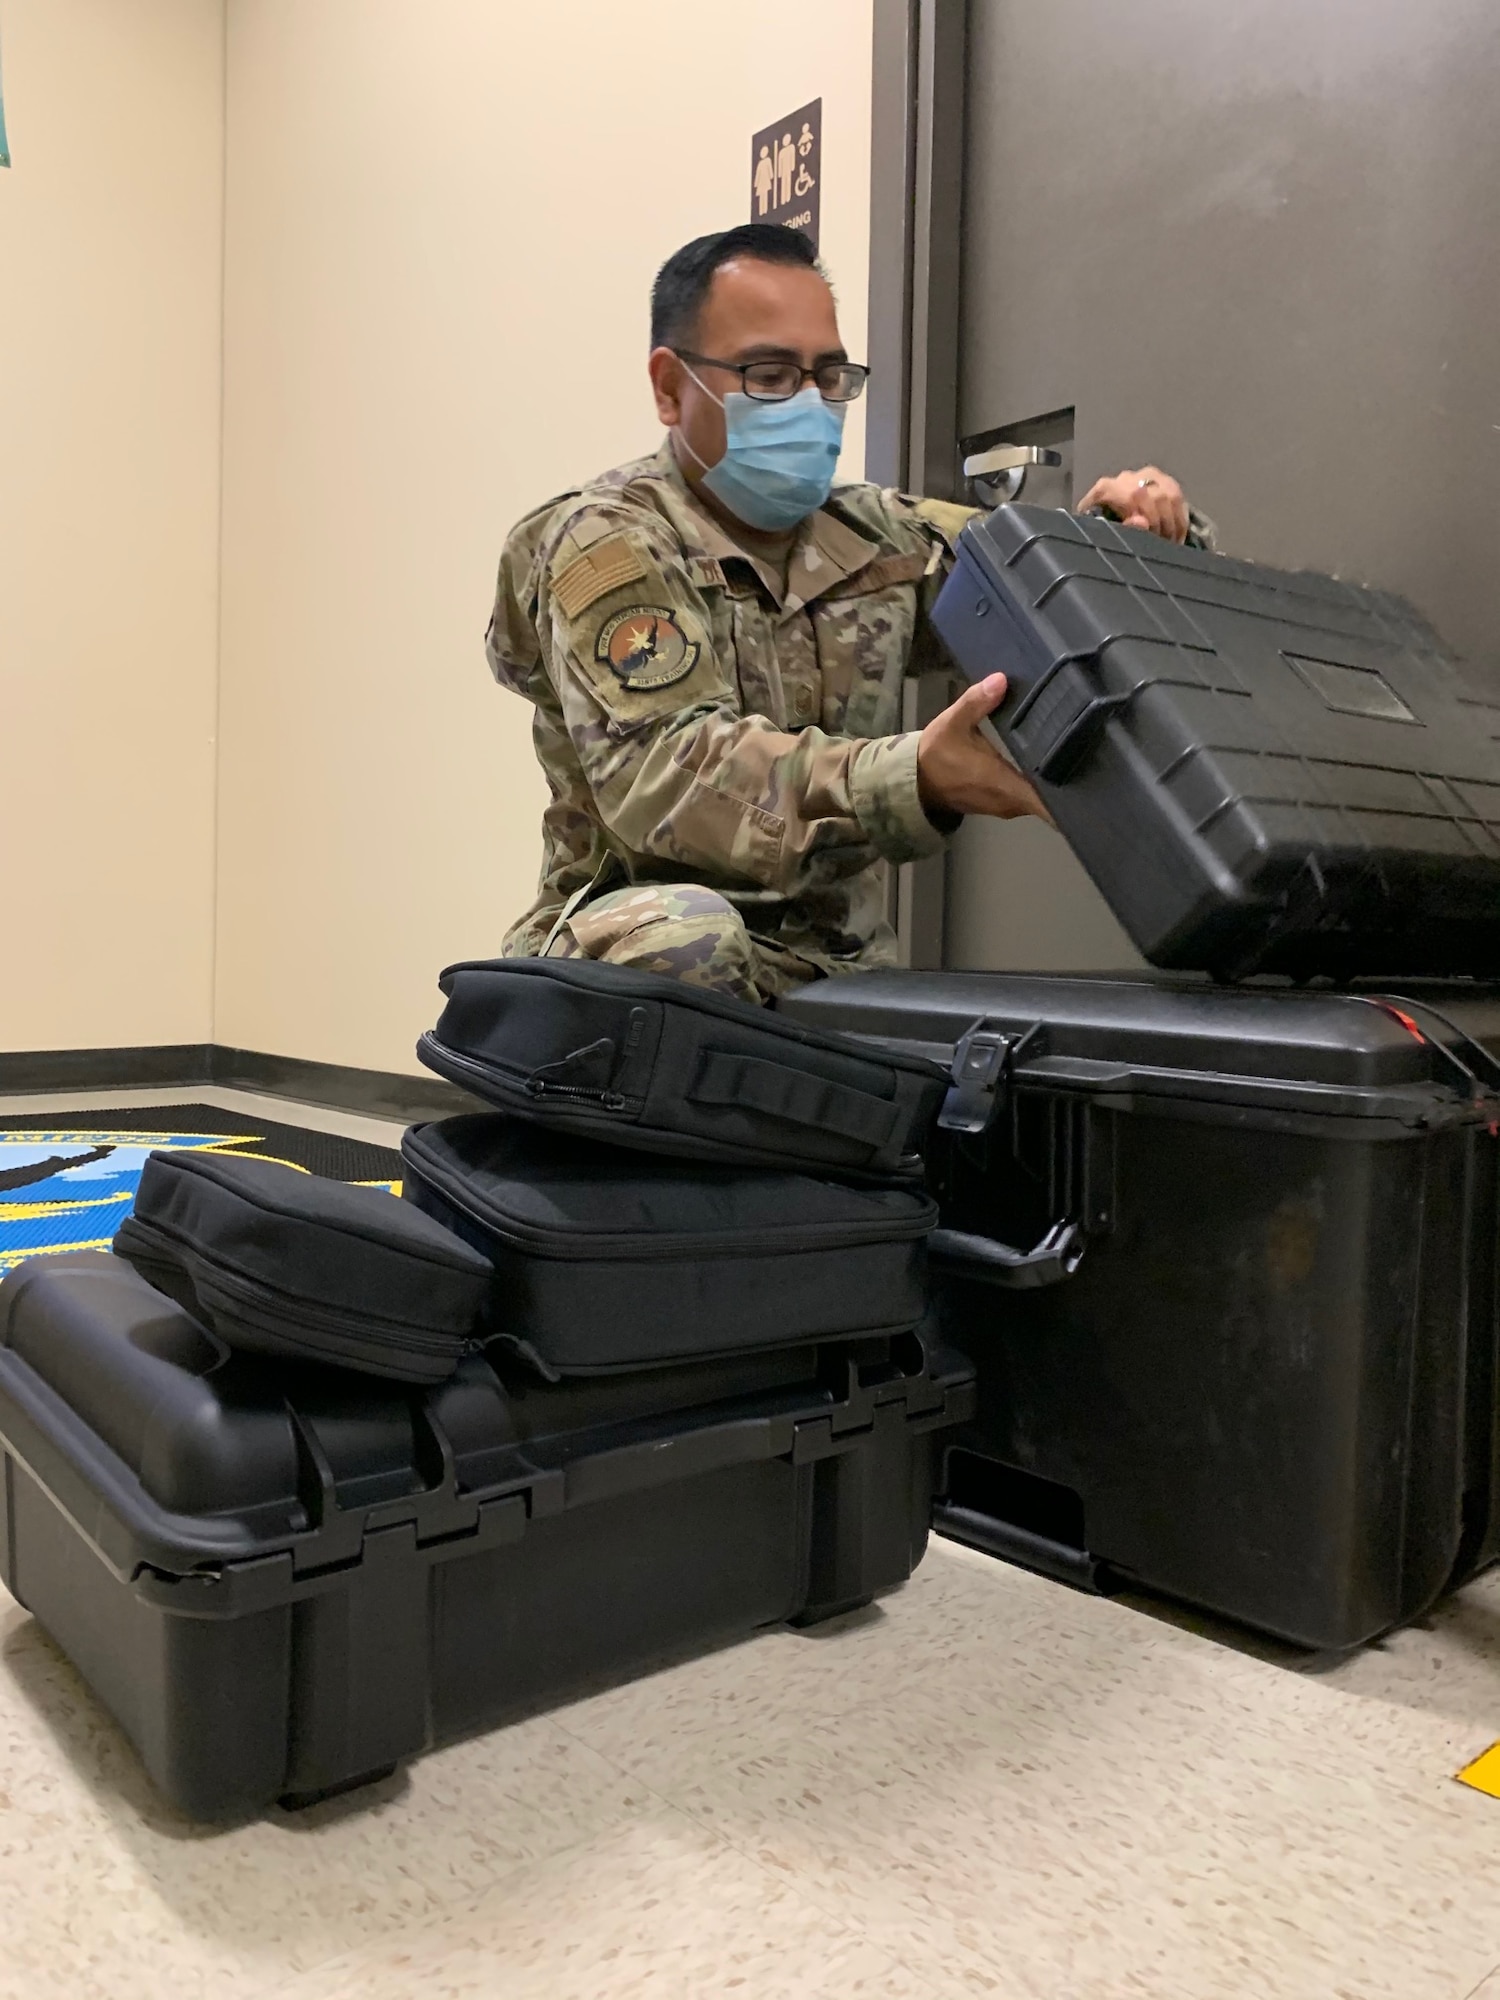 Master Sgt. Juan De La Rosa, 318th Training Squadron, “A” Flight Chief, sets up the paint simulator at Joint Base San Antonio, Lackland, Texas, April 28, 2021. The newly acquired software allows mobile training teams to travel with the equipment and provide instruction to partner nation members with real-time results while eliminating expenses. (U.S. Air Force photo by Vanessa R. Adame)